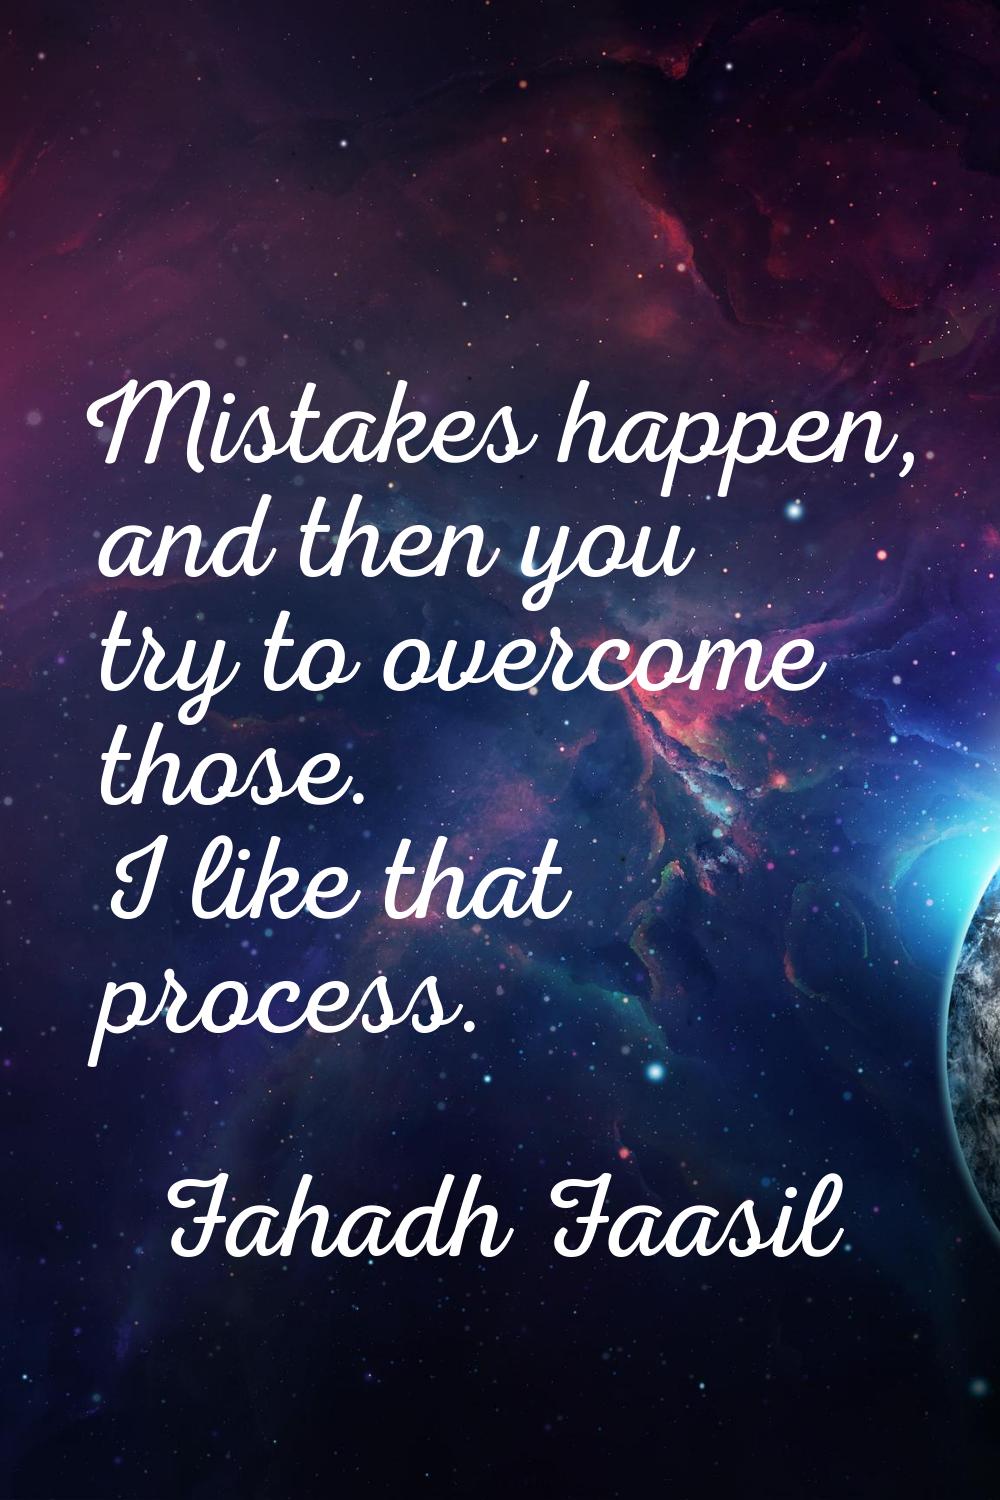 Mistakes happen, and then you try to overcome those. I like that process.